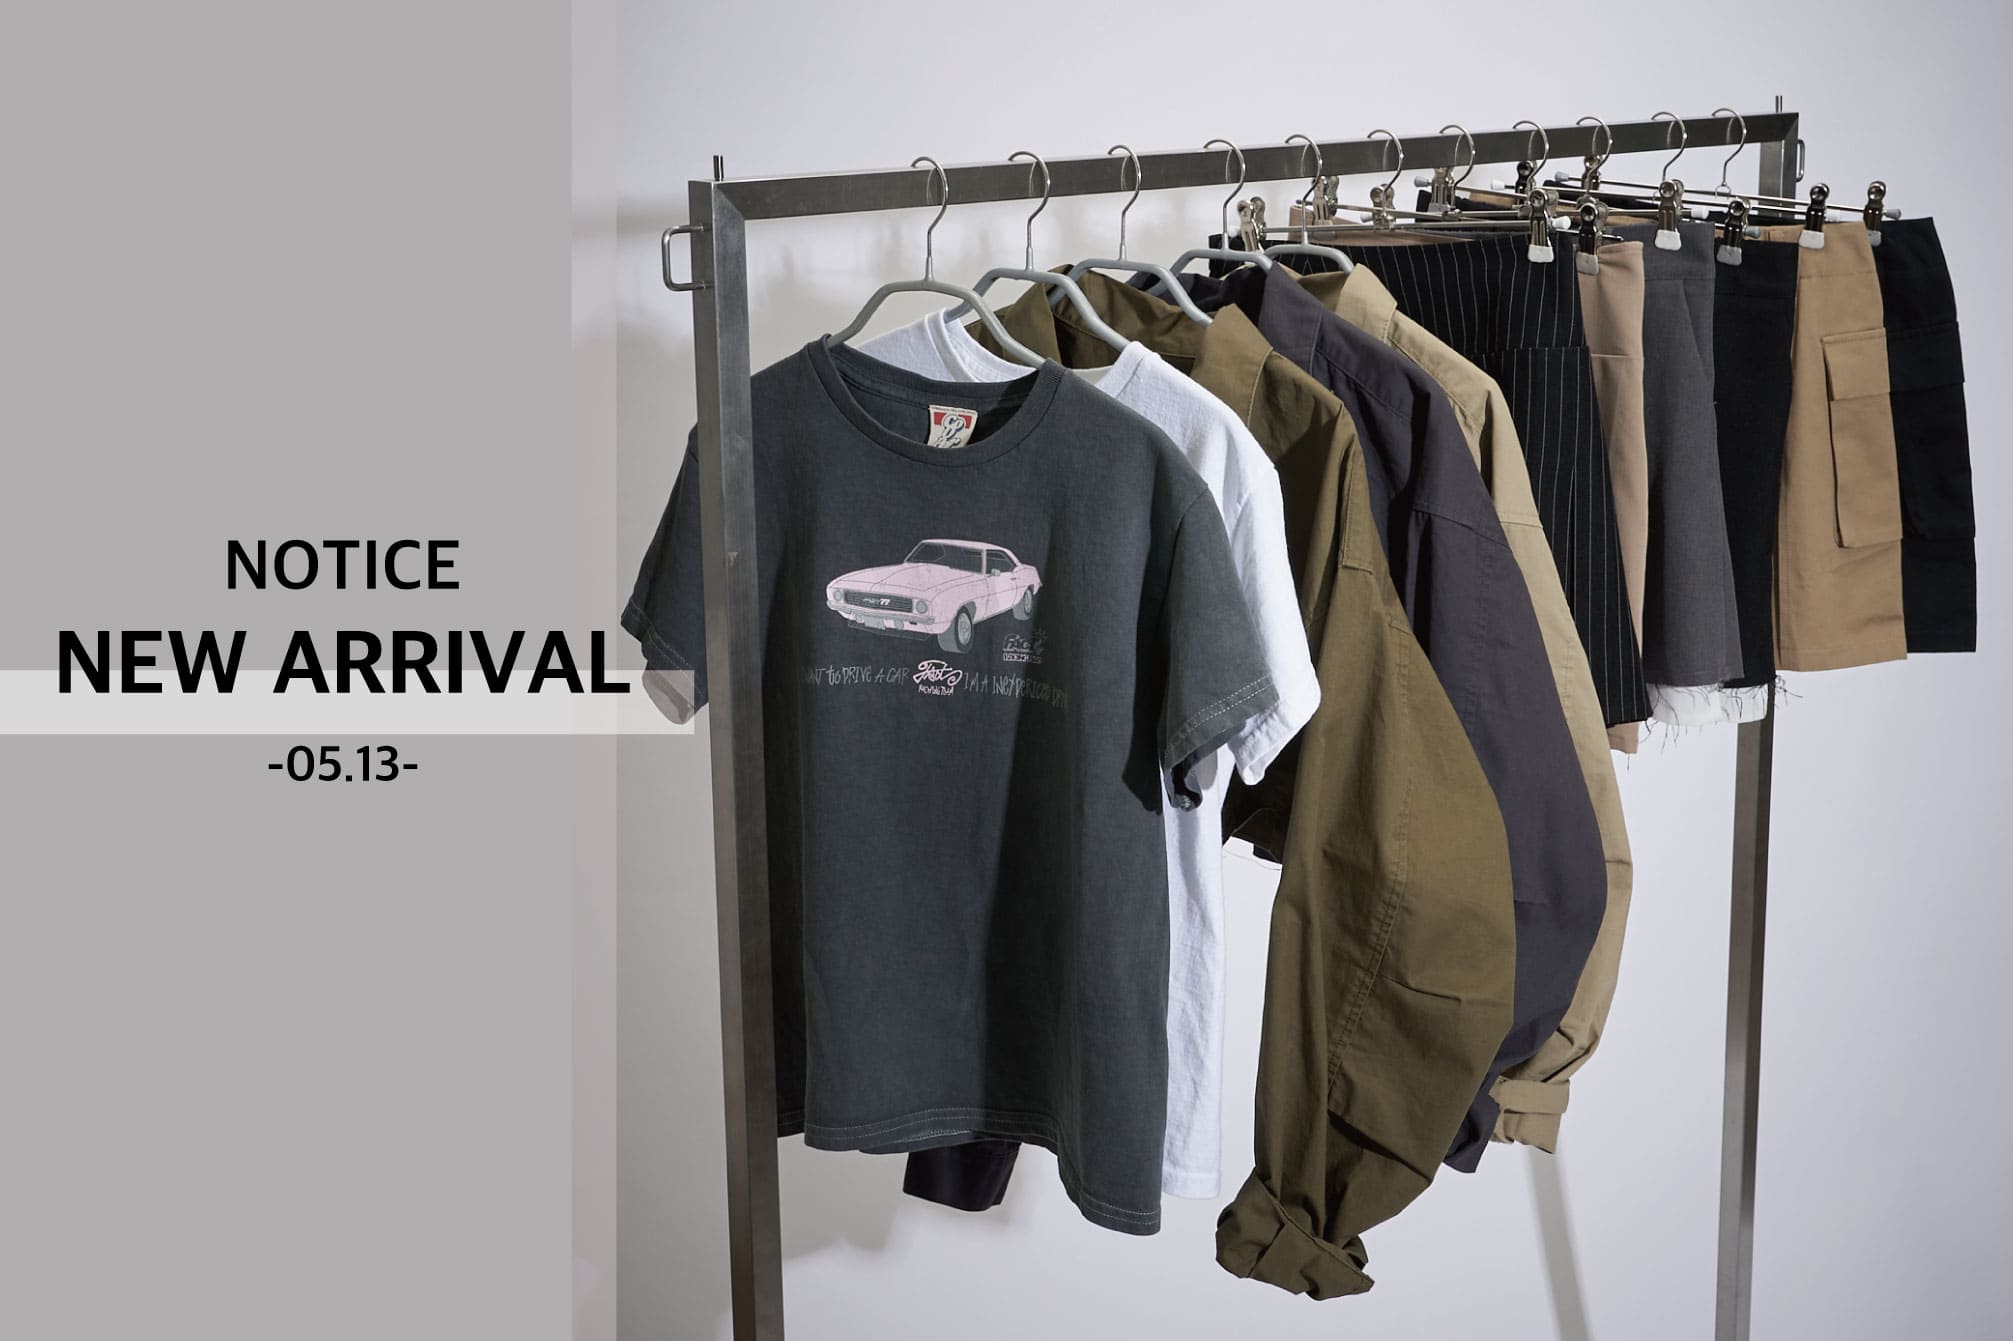 WHO’S WHO gallery 【NEW ARRIVAL NOTICE -05.13-】